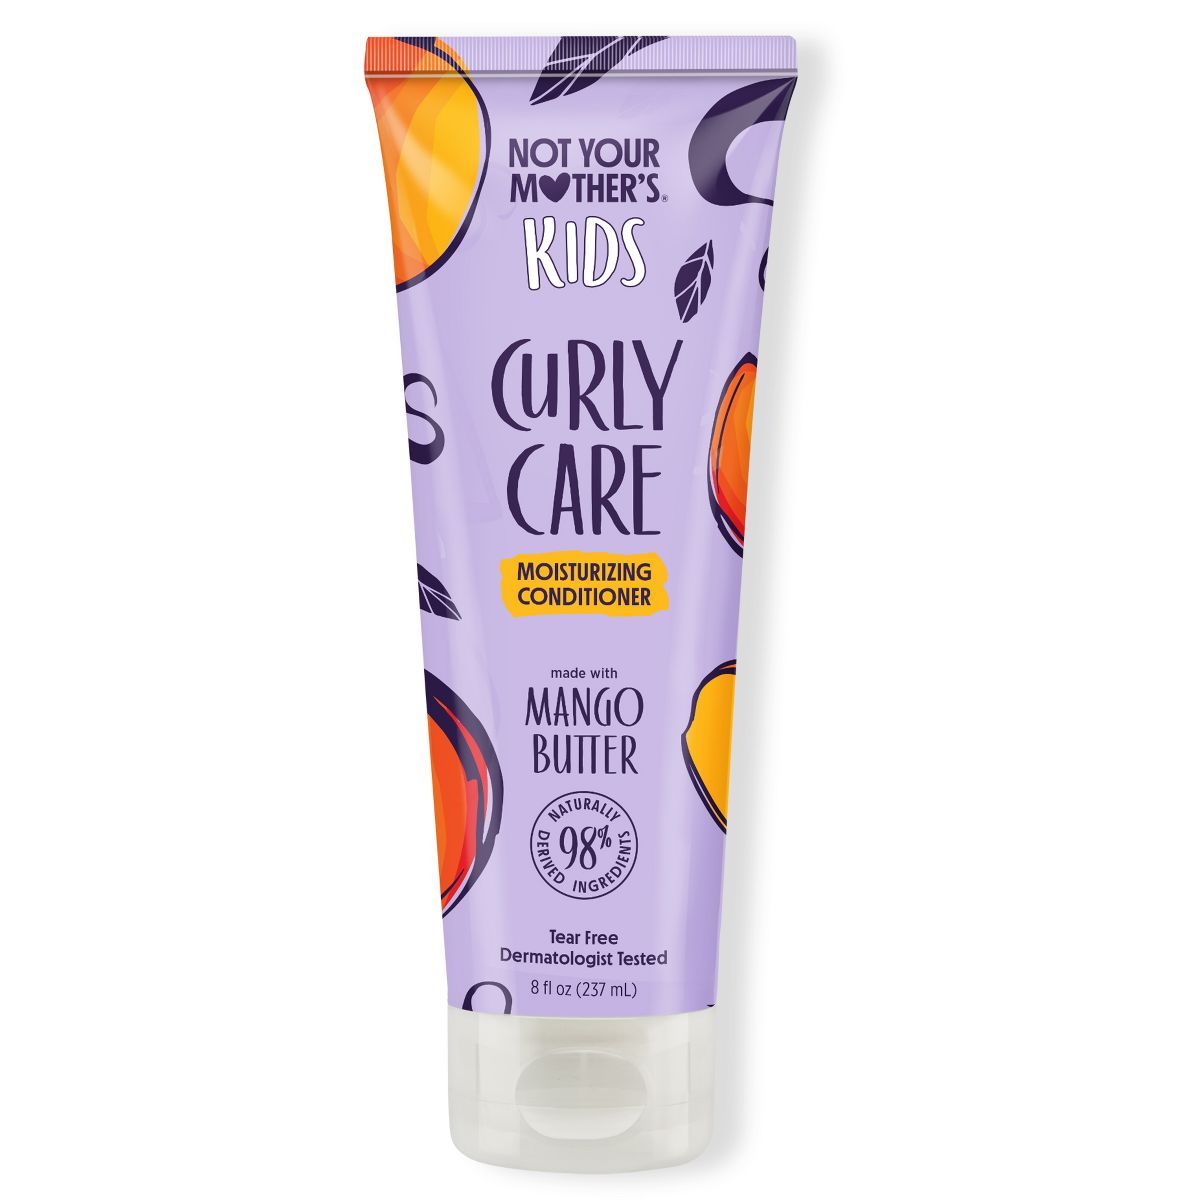 Not Your Mother's Kids' Curl Conditioner Tube for Curly Hair - 8 fl oz | Target